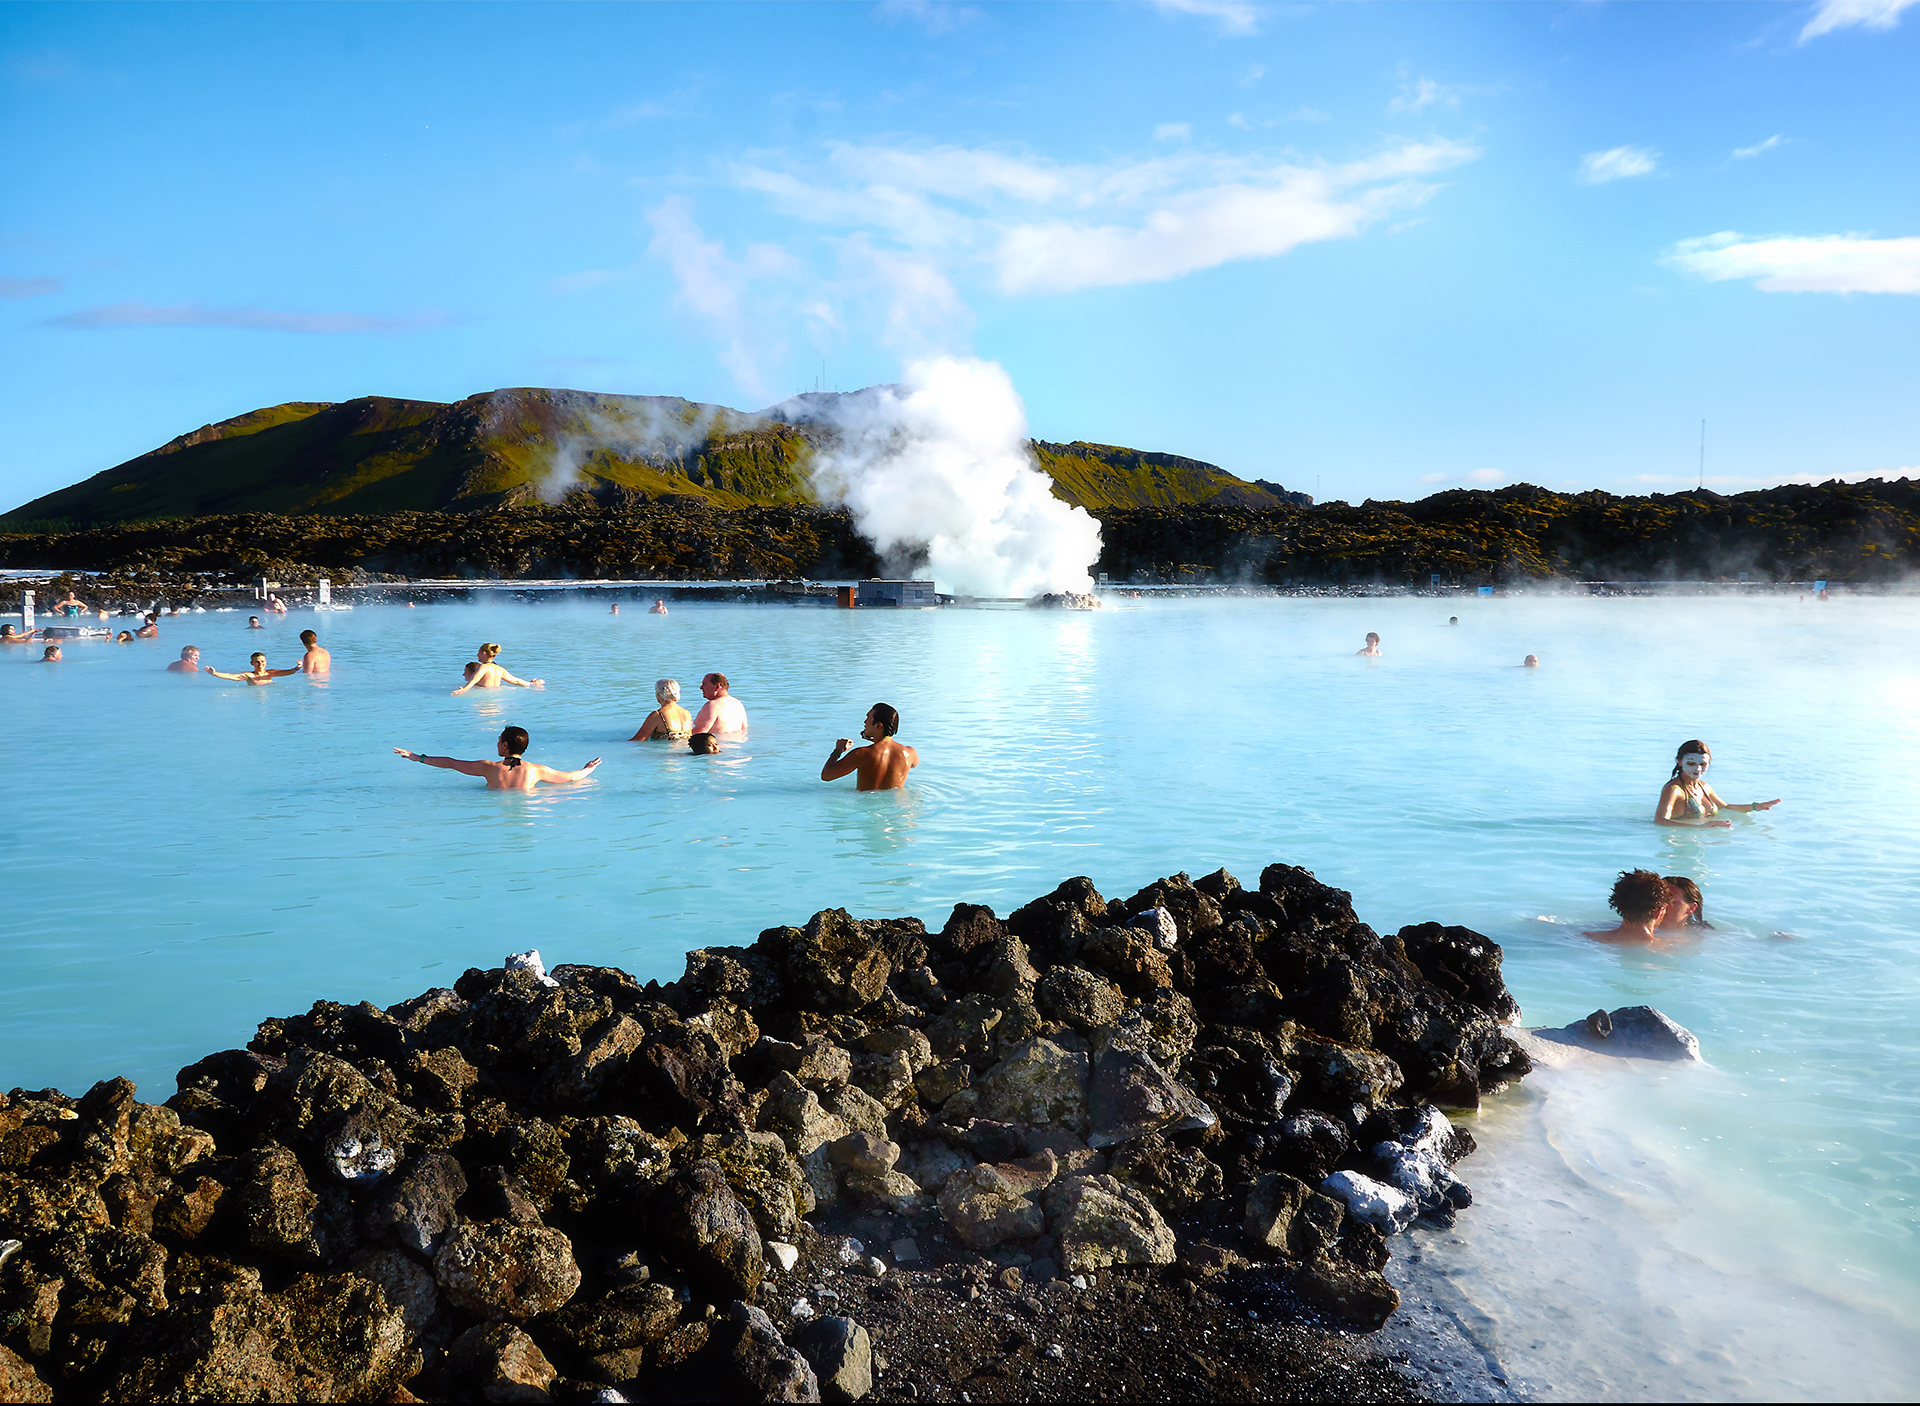 The 7 Most Beautiful Hot Springs In The World - My Weekly